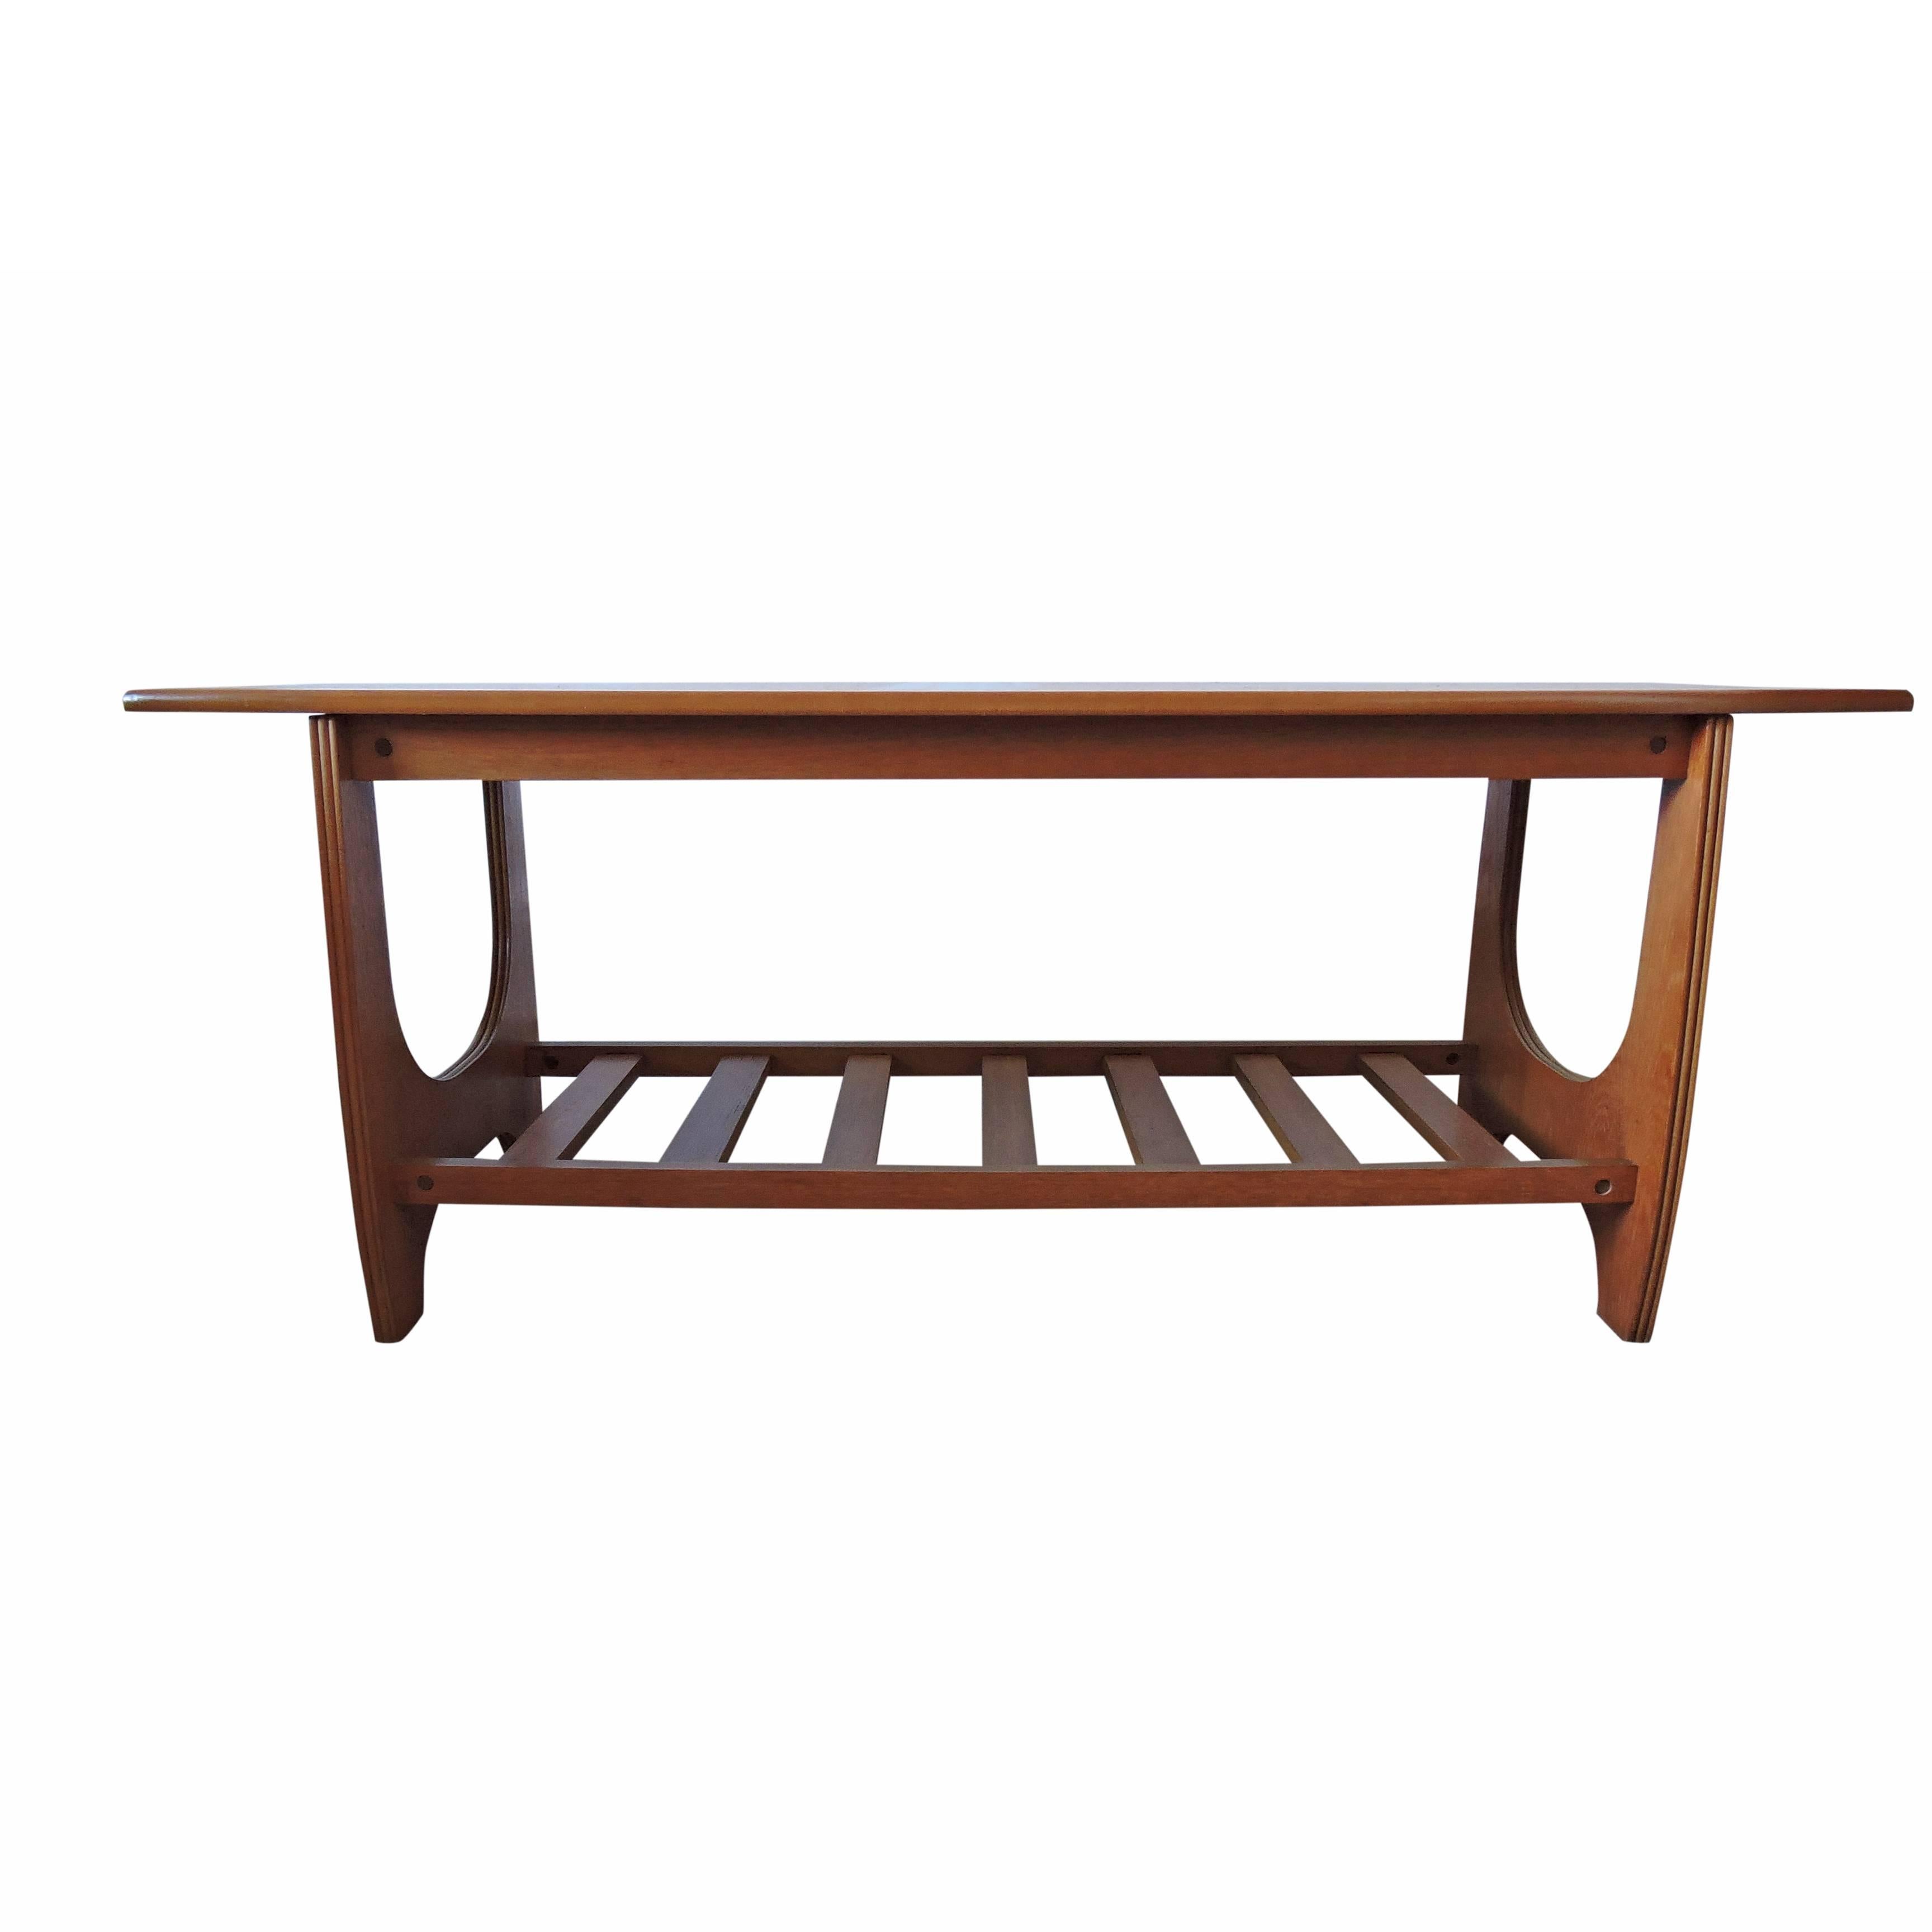 This 1960s coffee table features a top with a teak finish, as well as a slatted magazine rack.